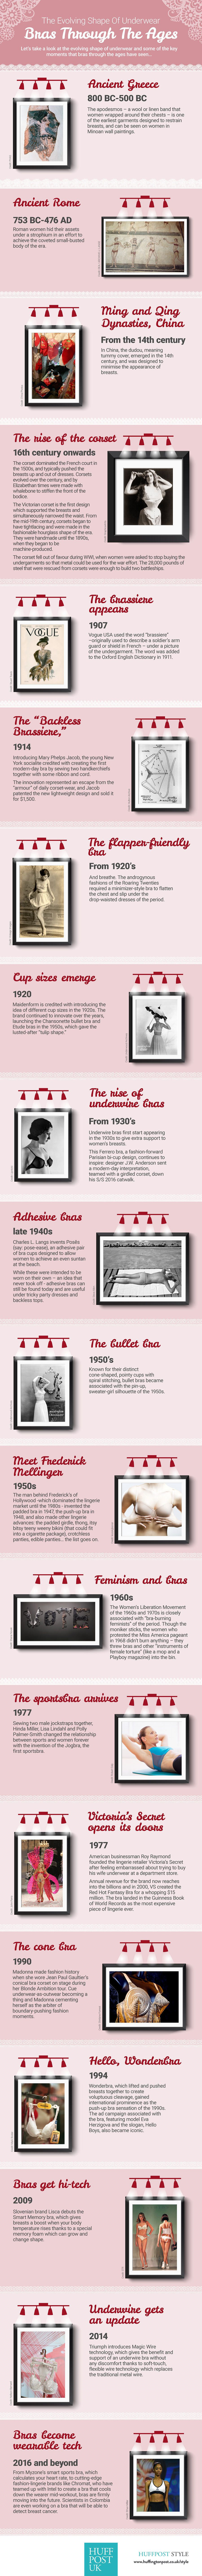 See The History Of The Bra In One Amazing Infographic